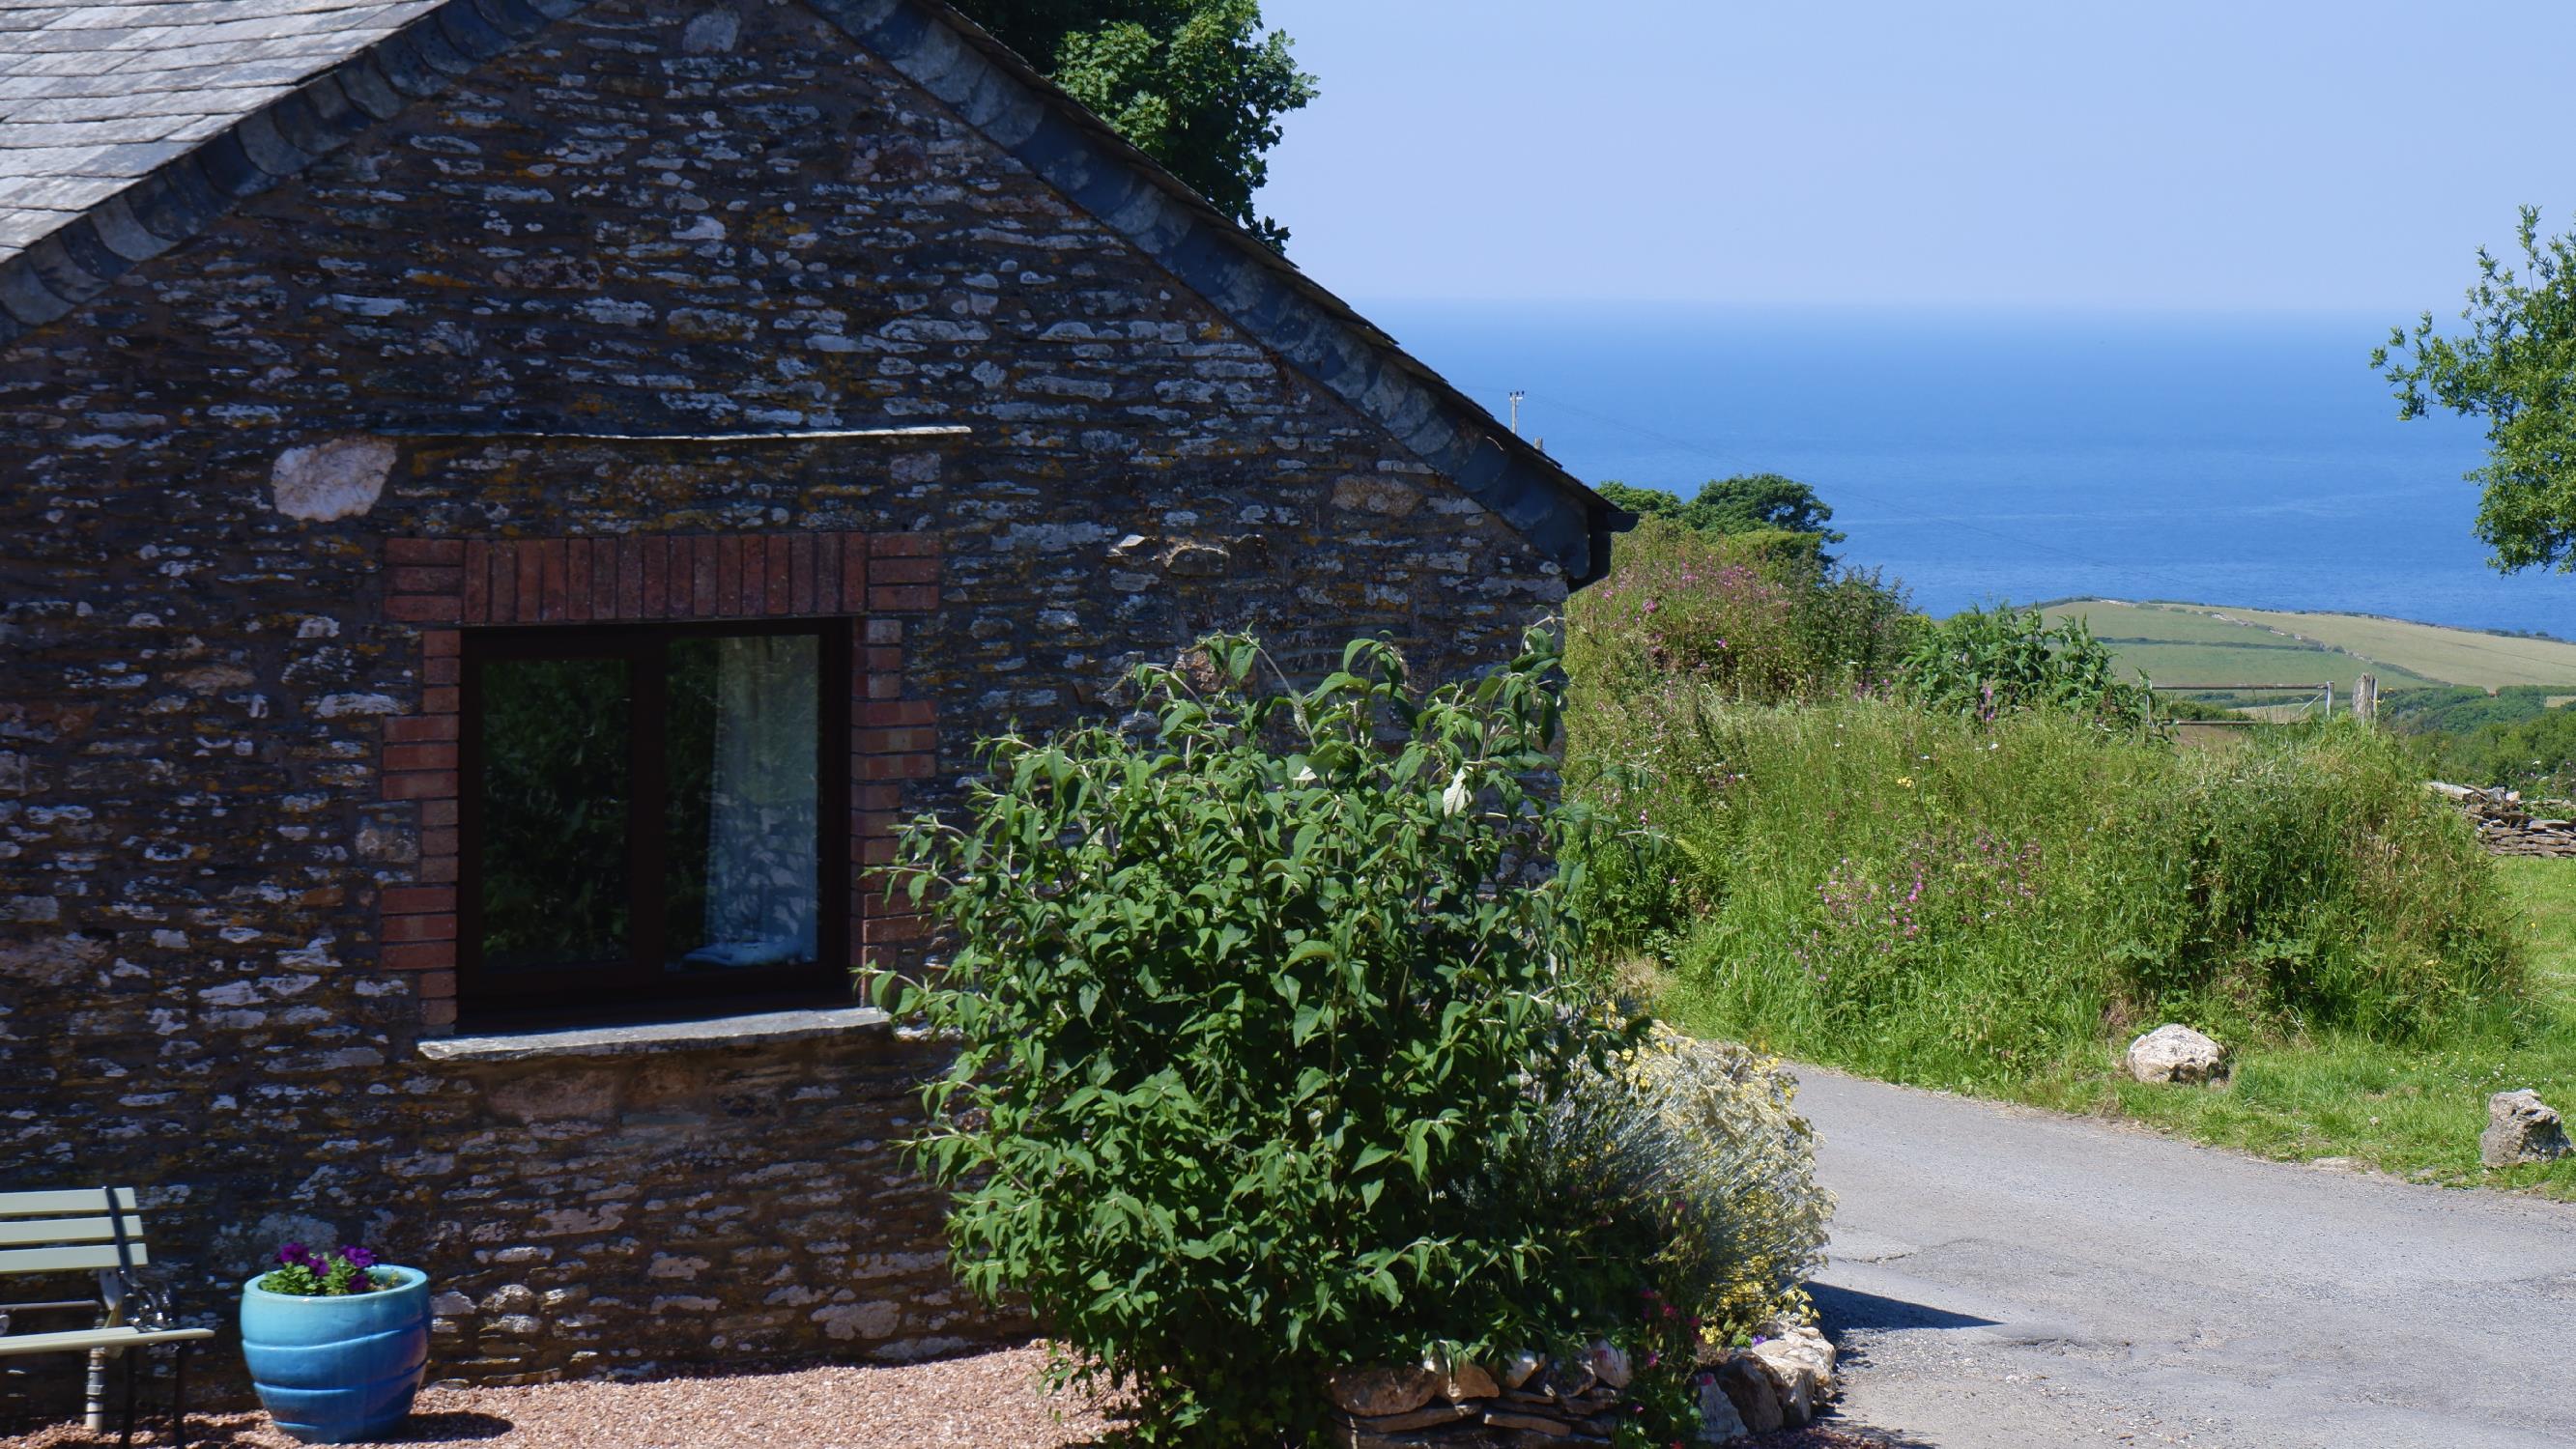 The sea view from Polrunny Farm's Seaberry Cottage, Boscastle, Cornwall